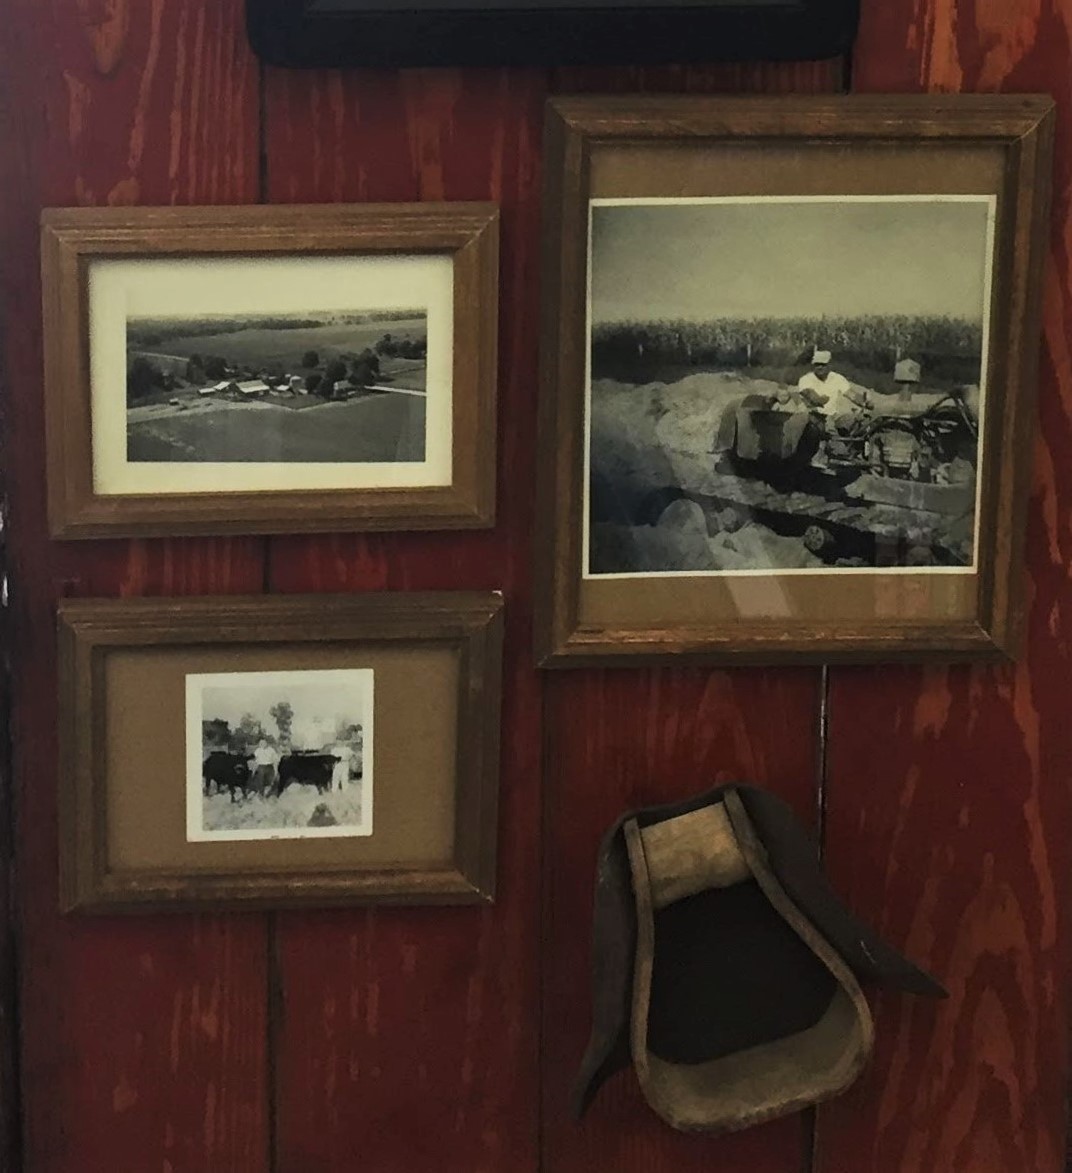 Photograph of a segment of Marshall Public Library’s companion exhibition representing the Miller family farm, including photographs and artifacts.